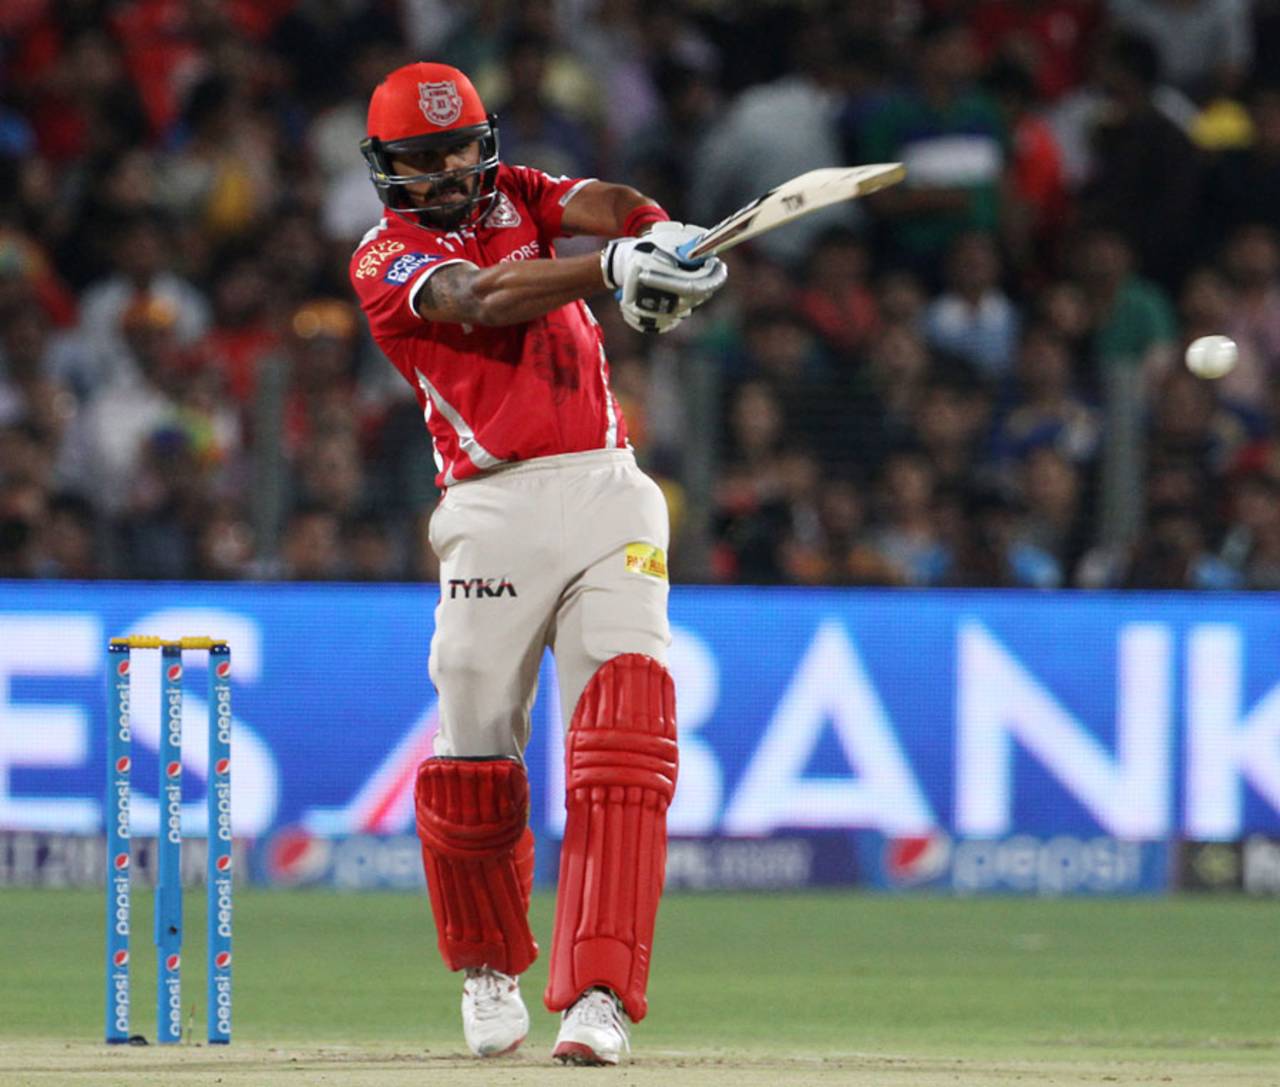 Kings XI Punjab opted to bat in Pune, and made early inroads as M Vijay began positively, depositing Domnic Muthuswami for a six in the second over&nbsp;&nbsp;&bull;&nbsp;&nbsp;BCCI